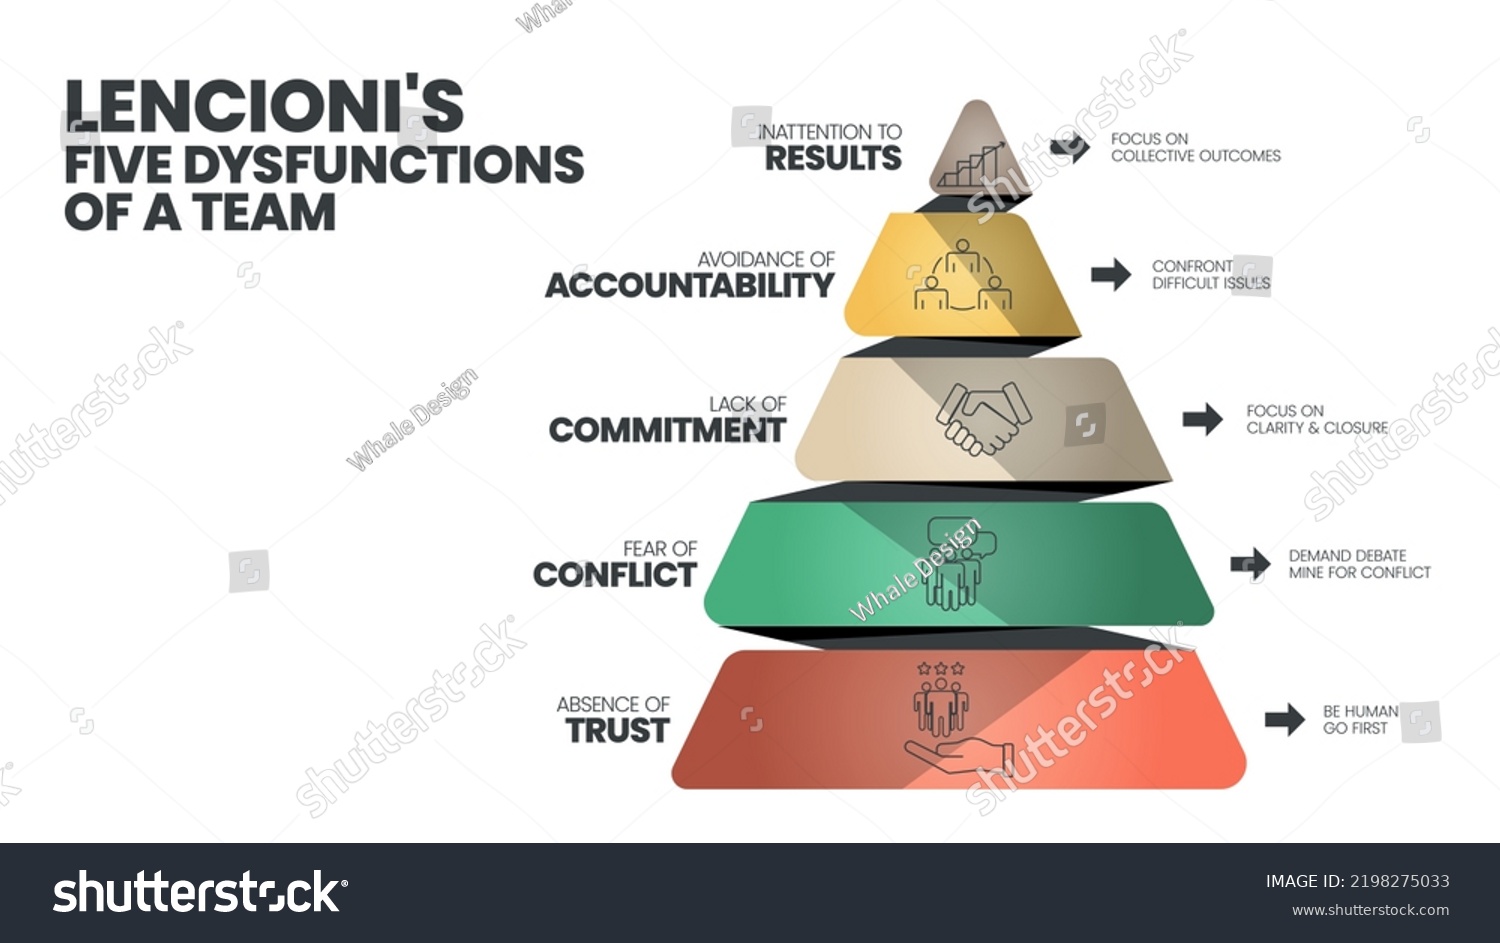 SVG of Lencioni's 5 Dysfunctions of a Team infographic template has 5 level to analyse such as Inattention to Results, Avoidance of Accountability, Lack of Commitment, Fear of Conflict and Absence of Trust. svg